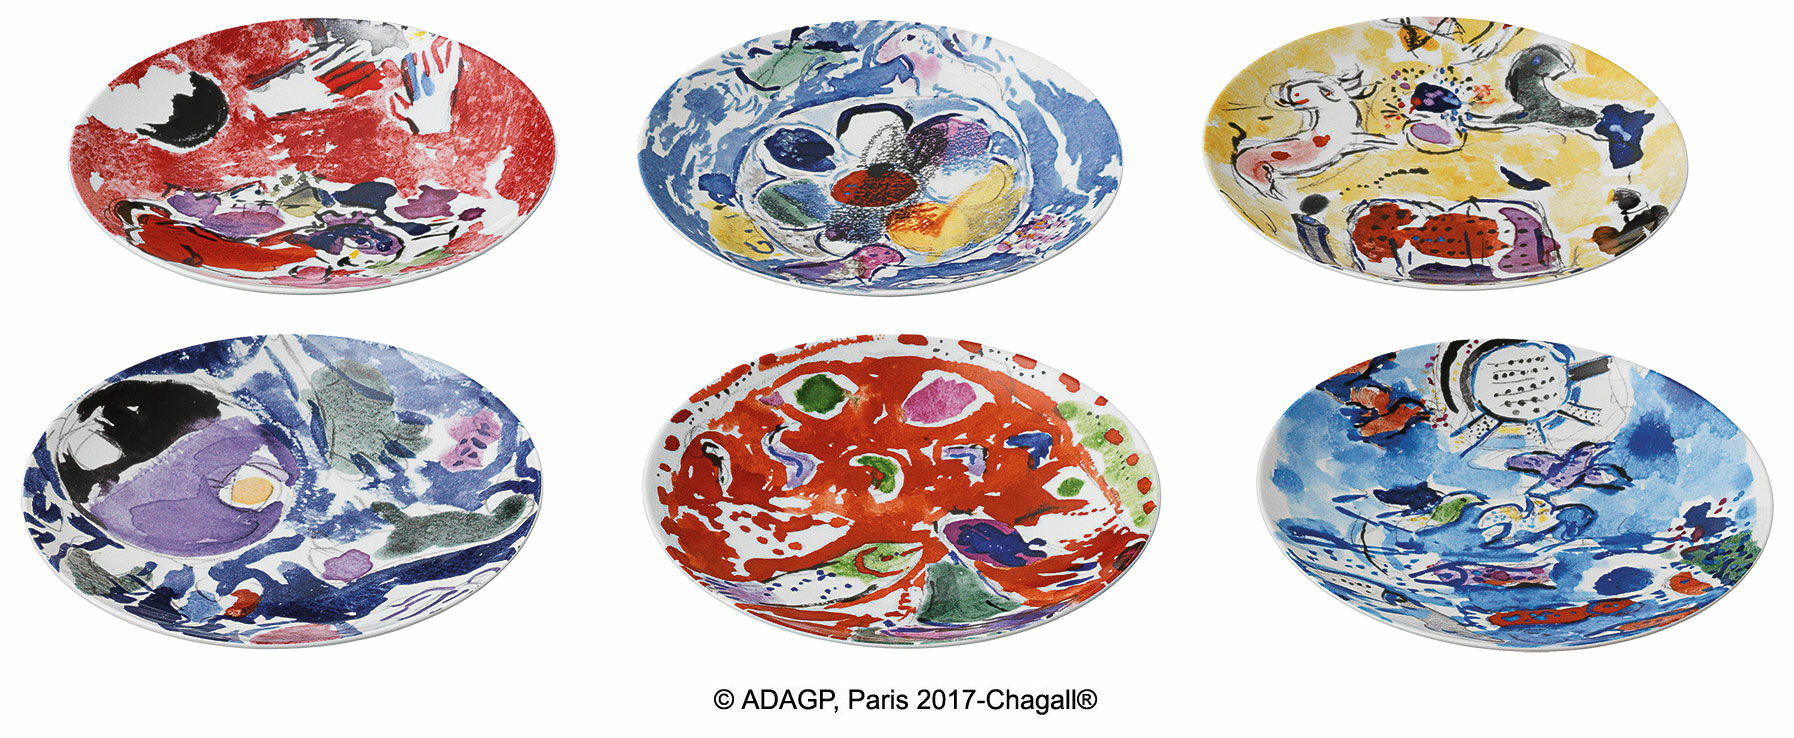 Les Vitraux d'Hadassah by Bernardaud - Set of 6 plates with artist's motifs, porcelain by Marc Chagall